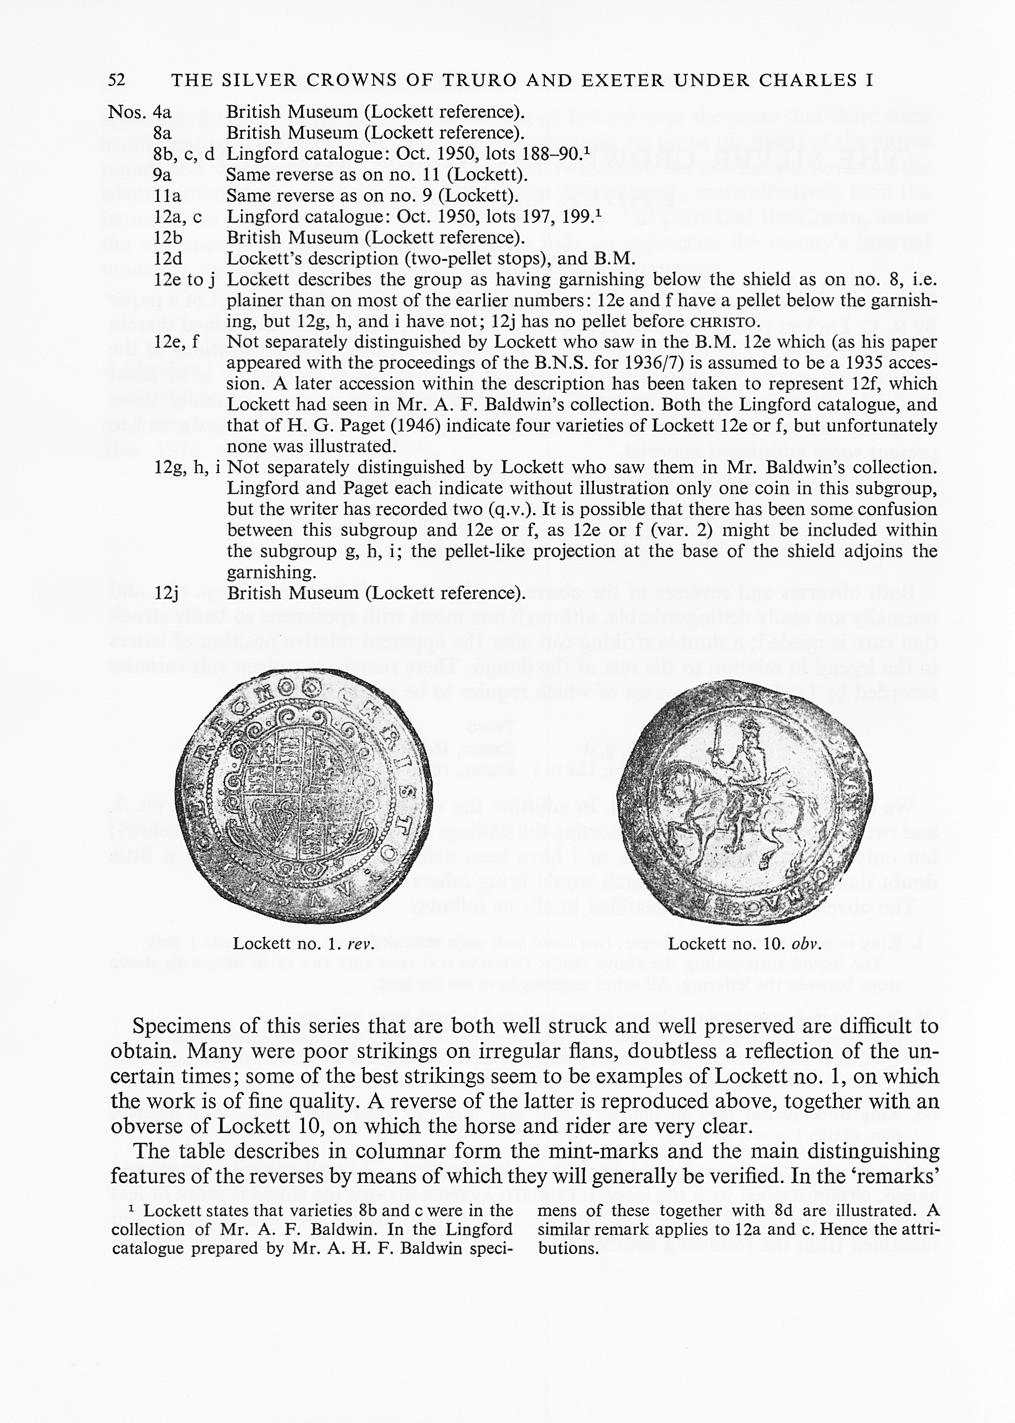 52 THE SILVER CROWNS OF TRURO AND EXETER UNDER CHARLES I Nos. 4a British Museum (Lockett reference). 8a British Museum (Lockett reference). 8b, c, d Lingford catalogue: Oct. 1950, lots 188-90.